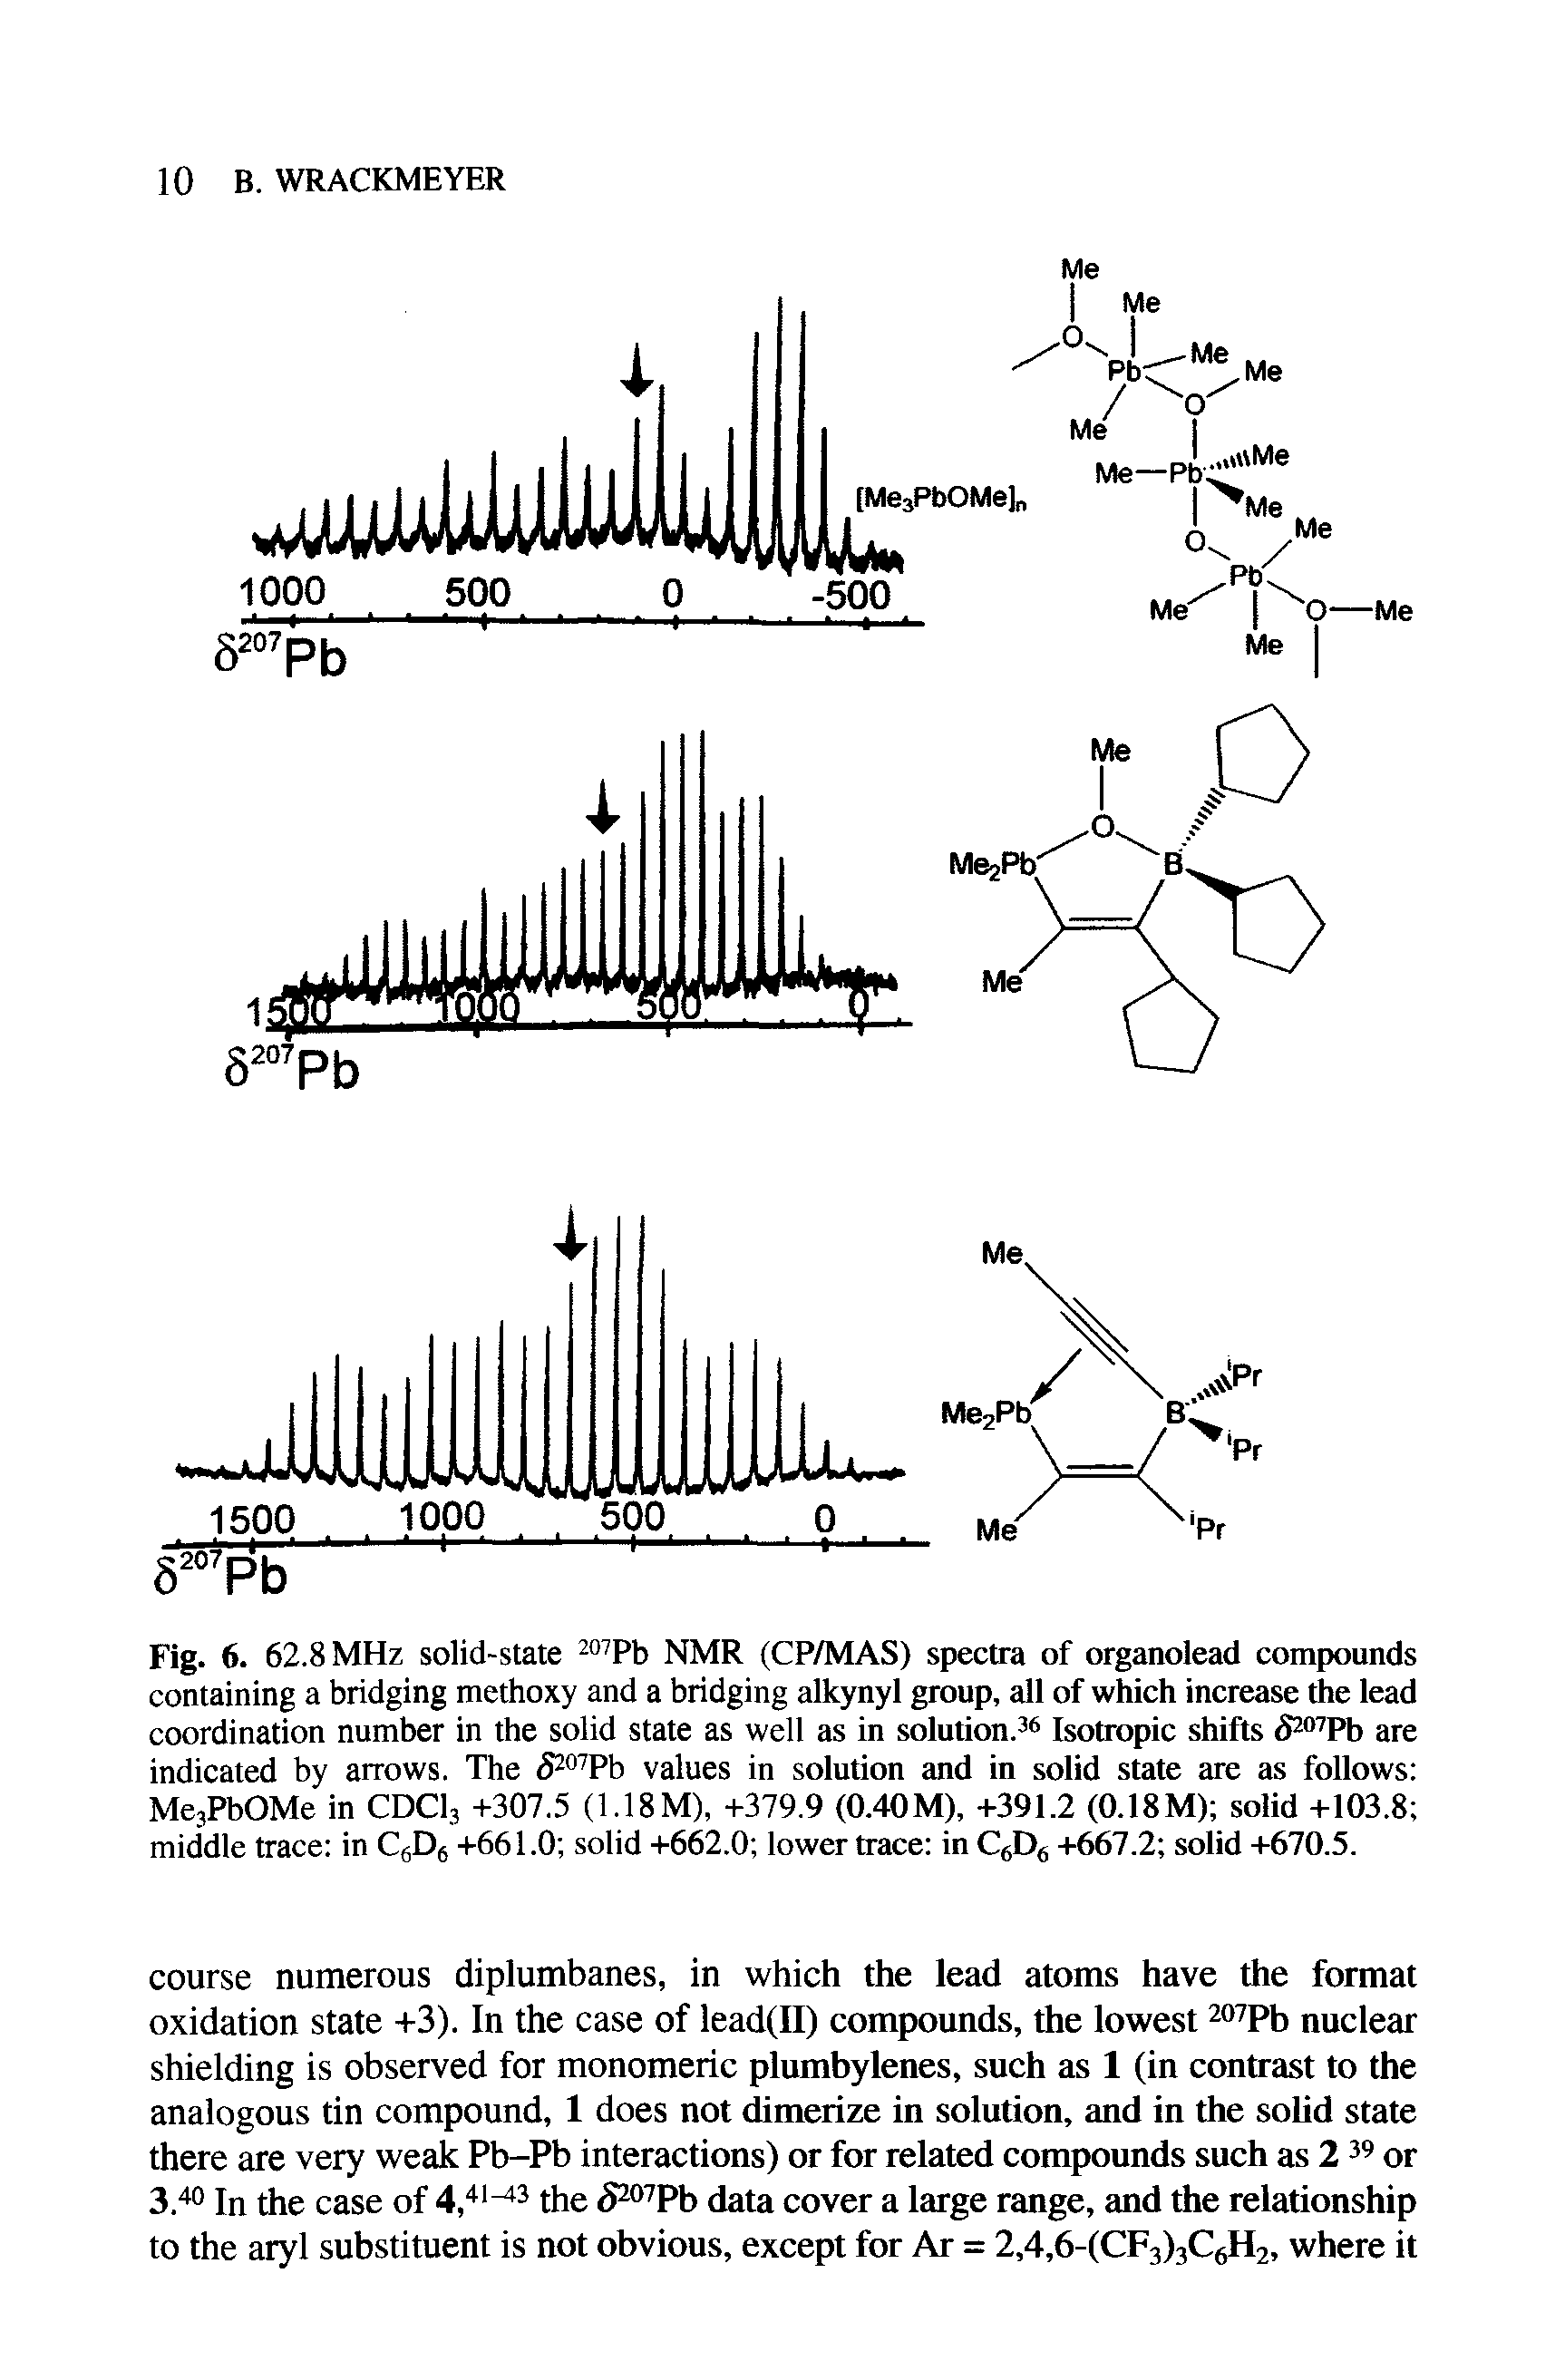 Fig. 6. 62.8 MHz solid-state 207Pb NMR (CP/MAS) spectra of organolead compounds containing a bridging methoxy and a bridging alkynyl group, all of which increase the lead coordination number in the solid state as well as in solution.36 Isotropic shifts S Pb are indicated by arrows. The <5207Pb values in solution and in solid state are as follows Me3PbOMe in CDCl3 +307.5 (1.18M), +379.9 (0.40 M), +391.2 (0.18M) solid +103.8 middle trace in CflD6 +661.0 solid +662.0 lower trace in C6D6 +667.2 solid +670.5.